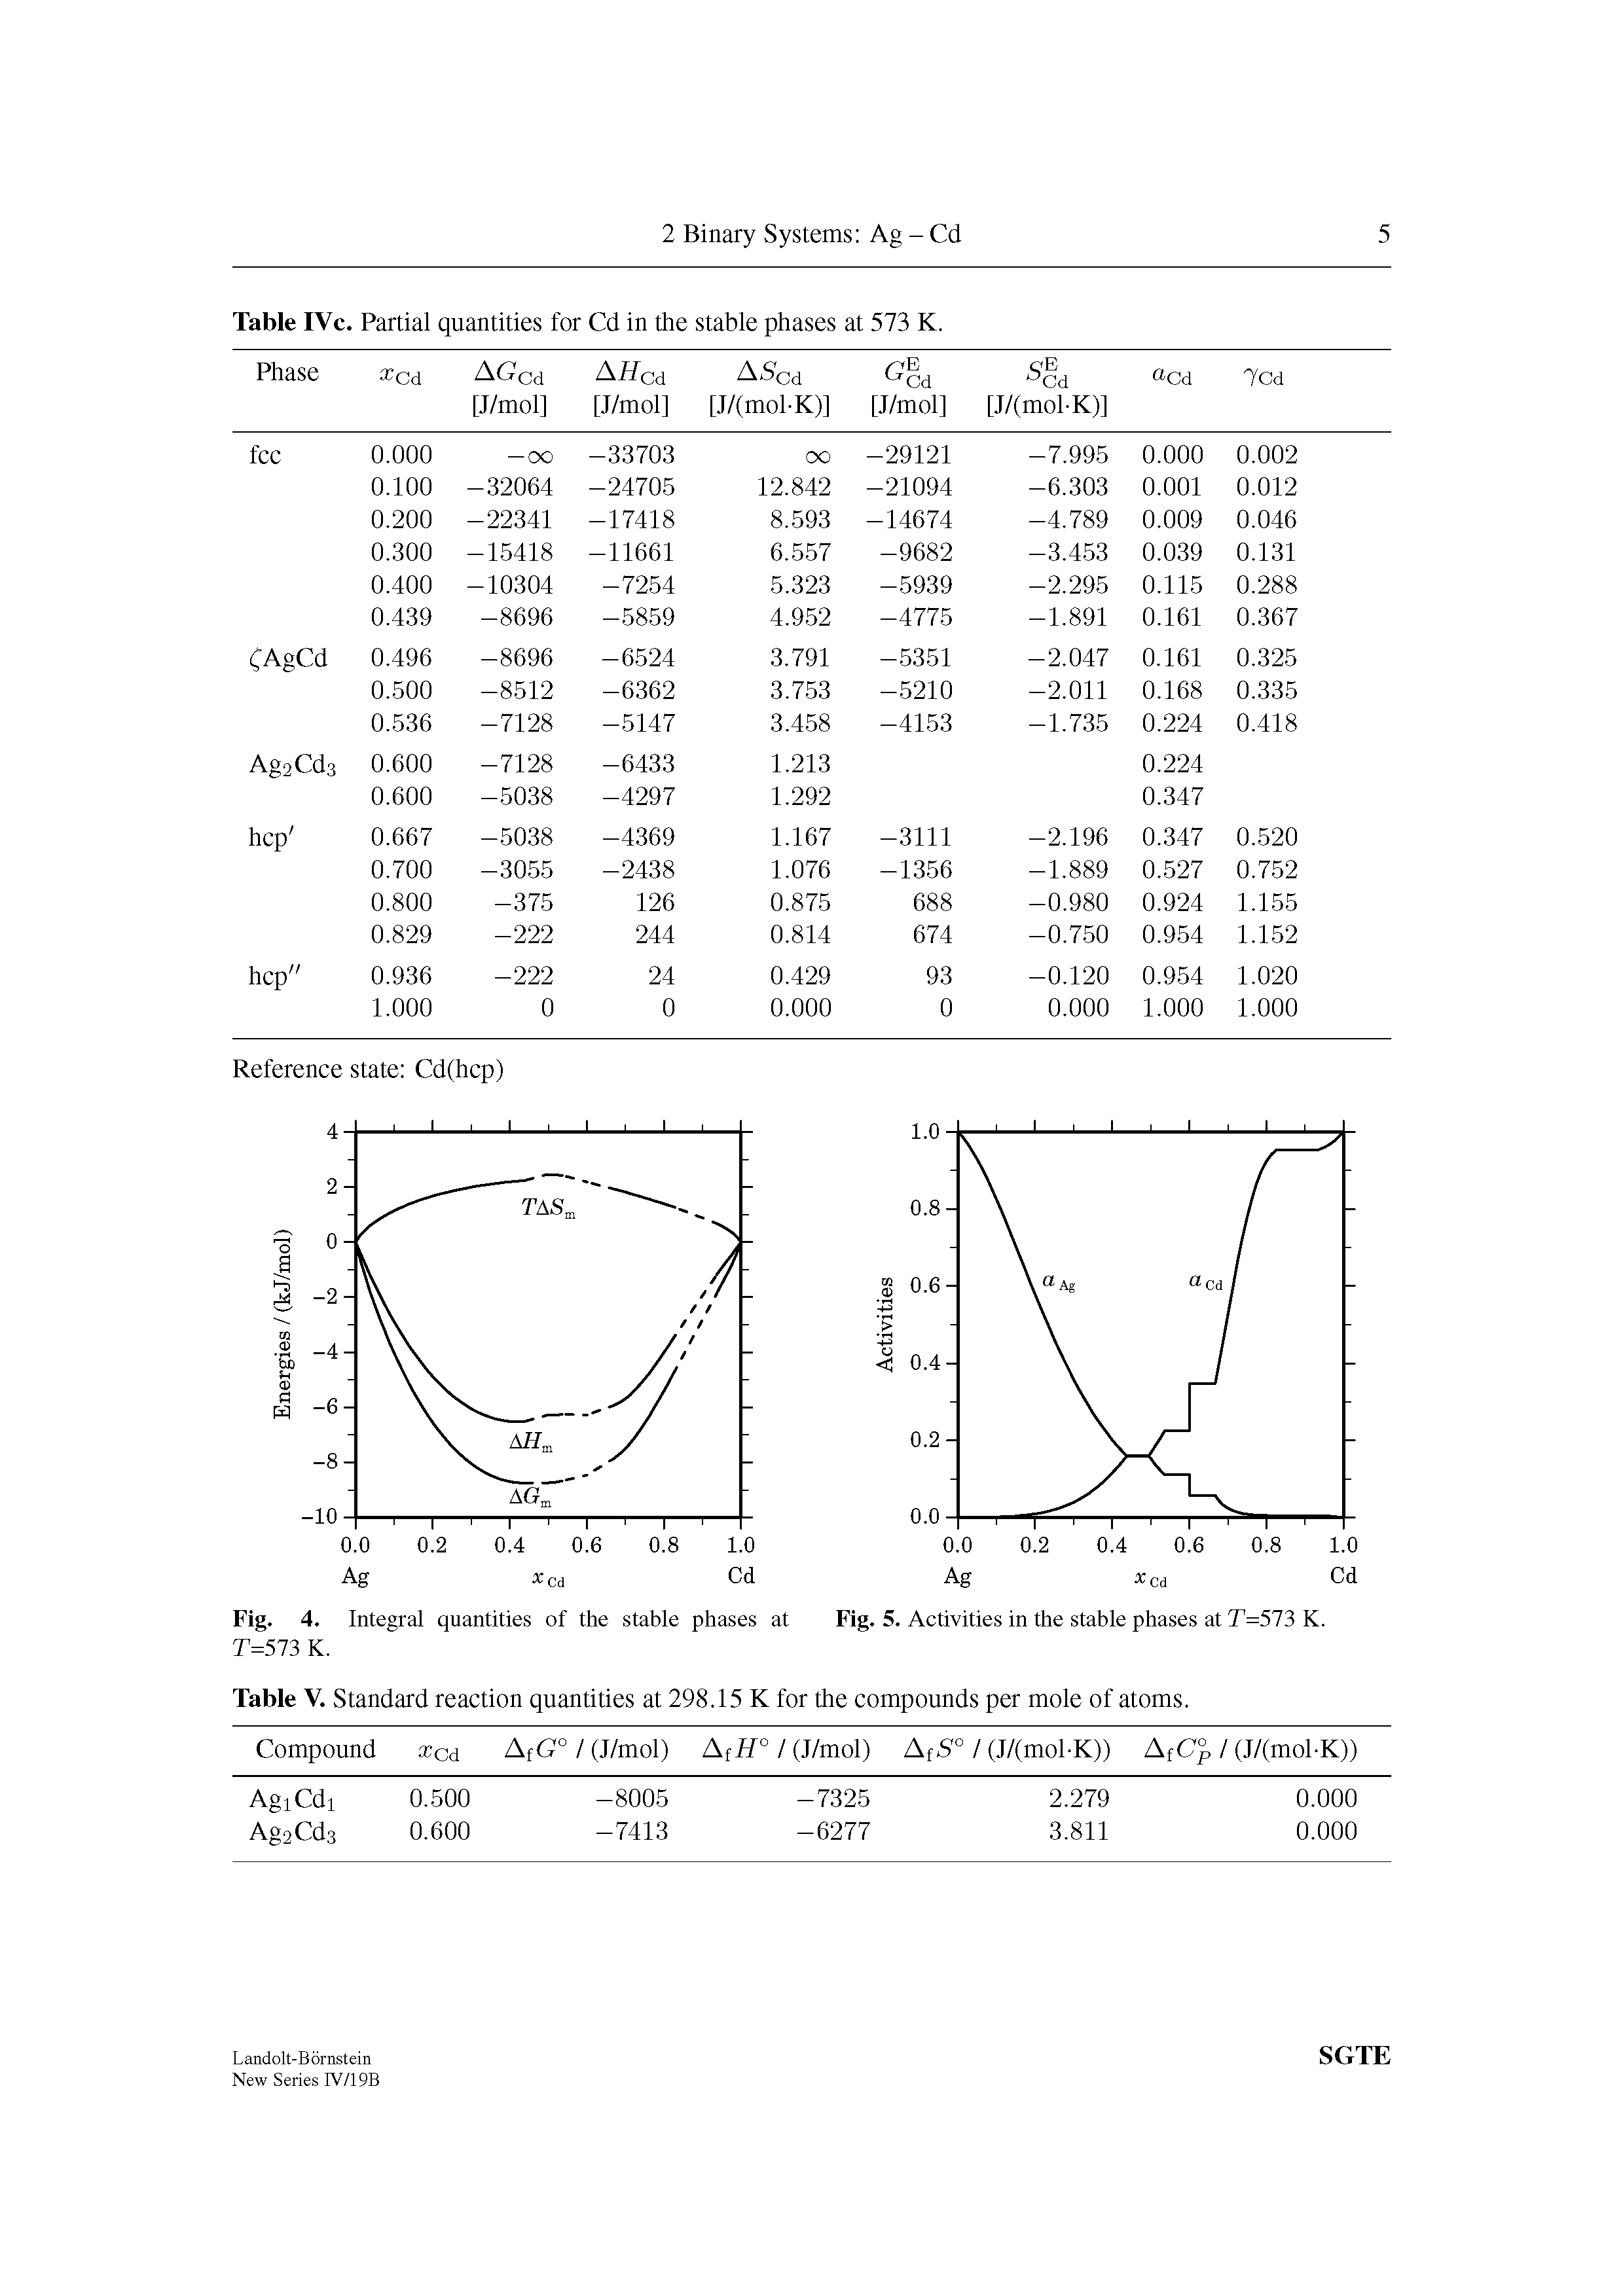 Fig. 4. Integral quantities of the stable phases at Fig. 5. Activities in the stable phases at T=573 K. T=573 K.